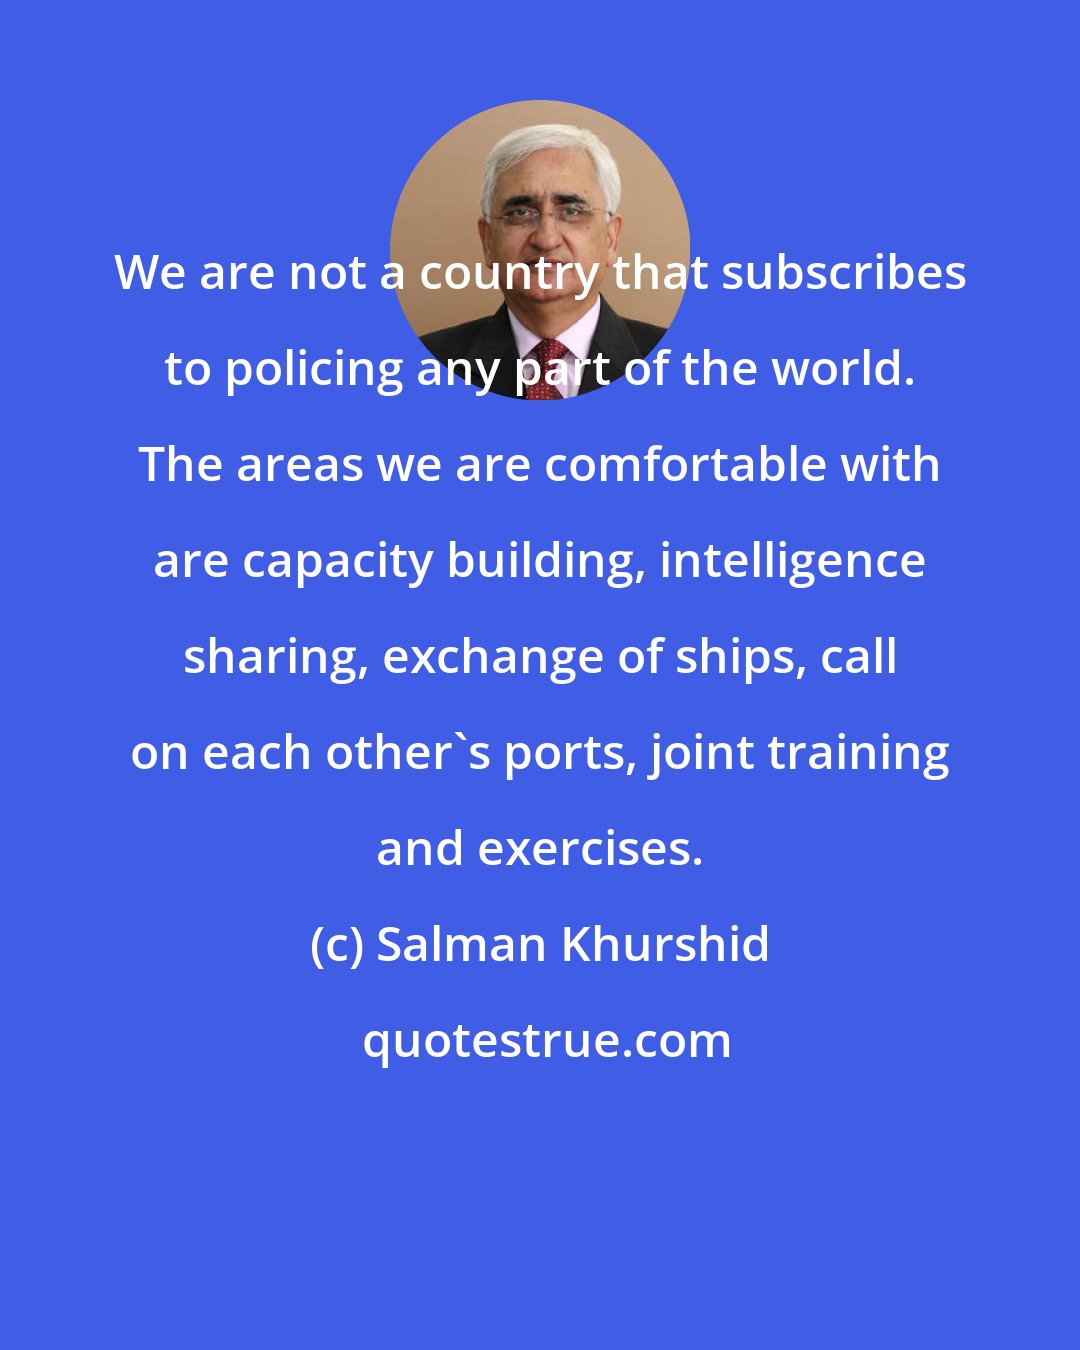 Salman Khurshid: We are not a country that subscribes to policing any part of the world. The areas we are comfortable with are capacity building, intelligence sharing, exchange of ships, call on each other's ports, joint training and exercises.